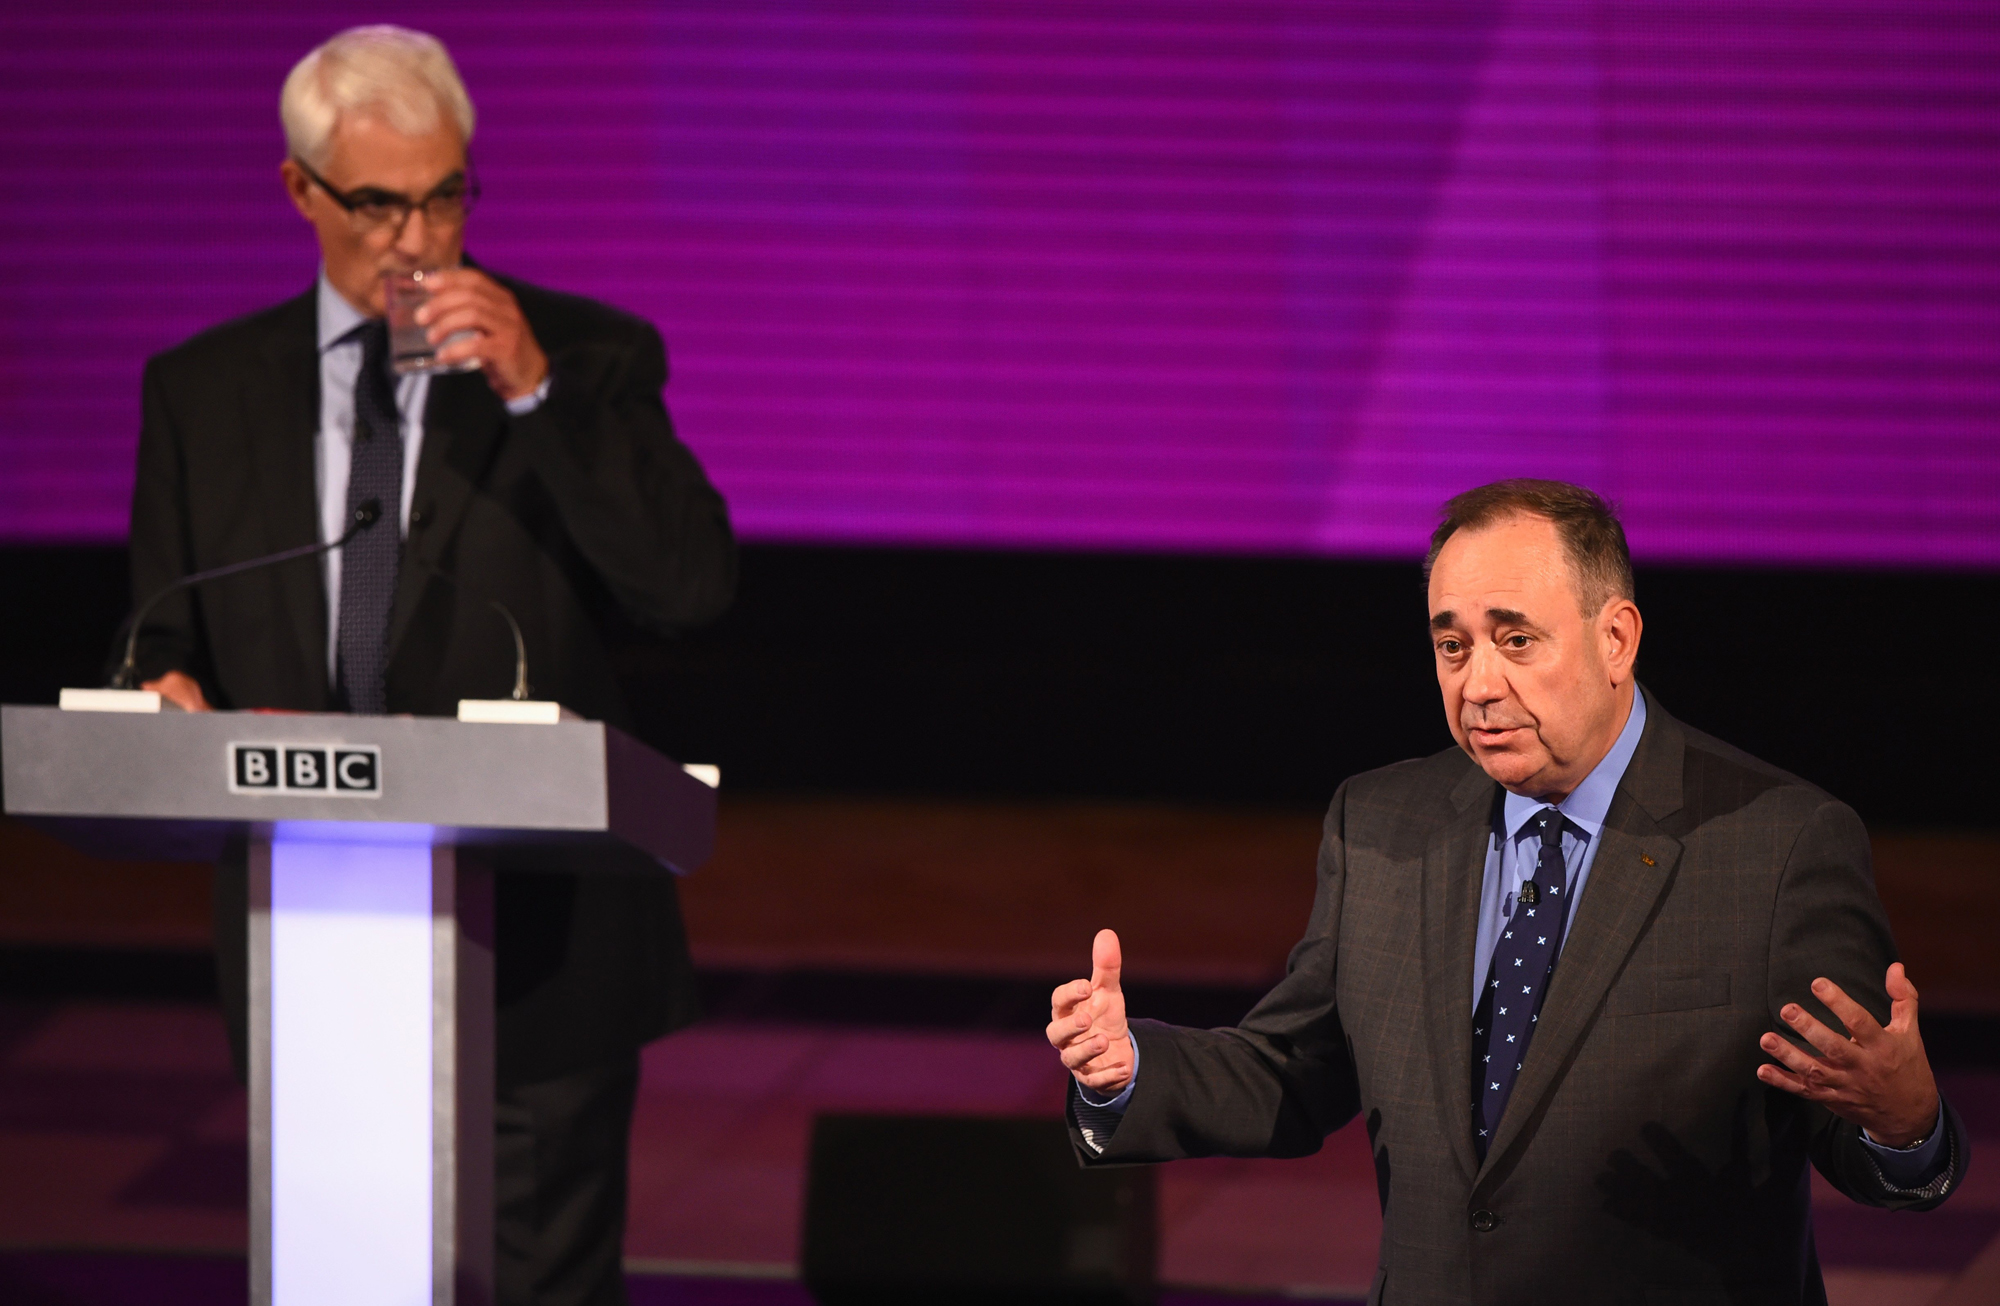 Alex Salmond, First Minister of Scotland and Alistair Darling, chairman of Better Together, take part in a live television debate by the BBC in the Kelvingrove Art Galleries on Aug. 25, 2014 in Glasgow, Scotland. (Jeff J Mitchell—Getty Images)